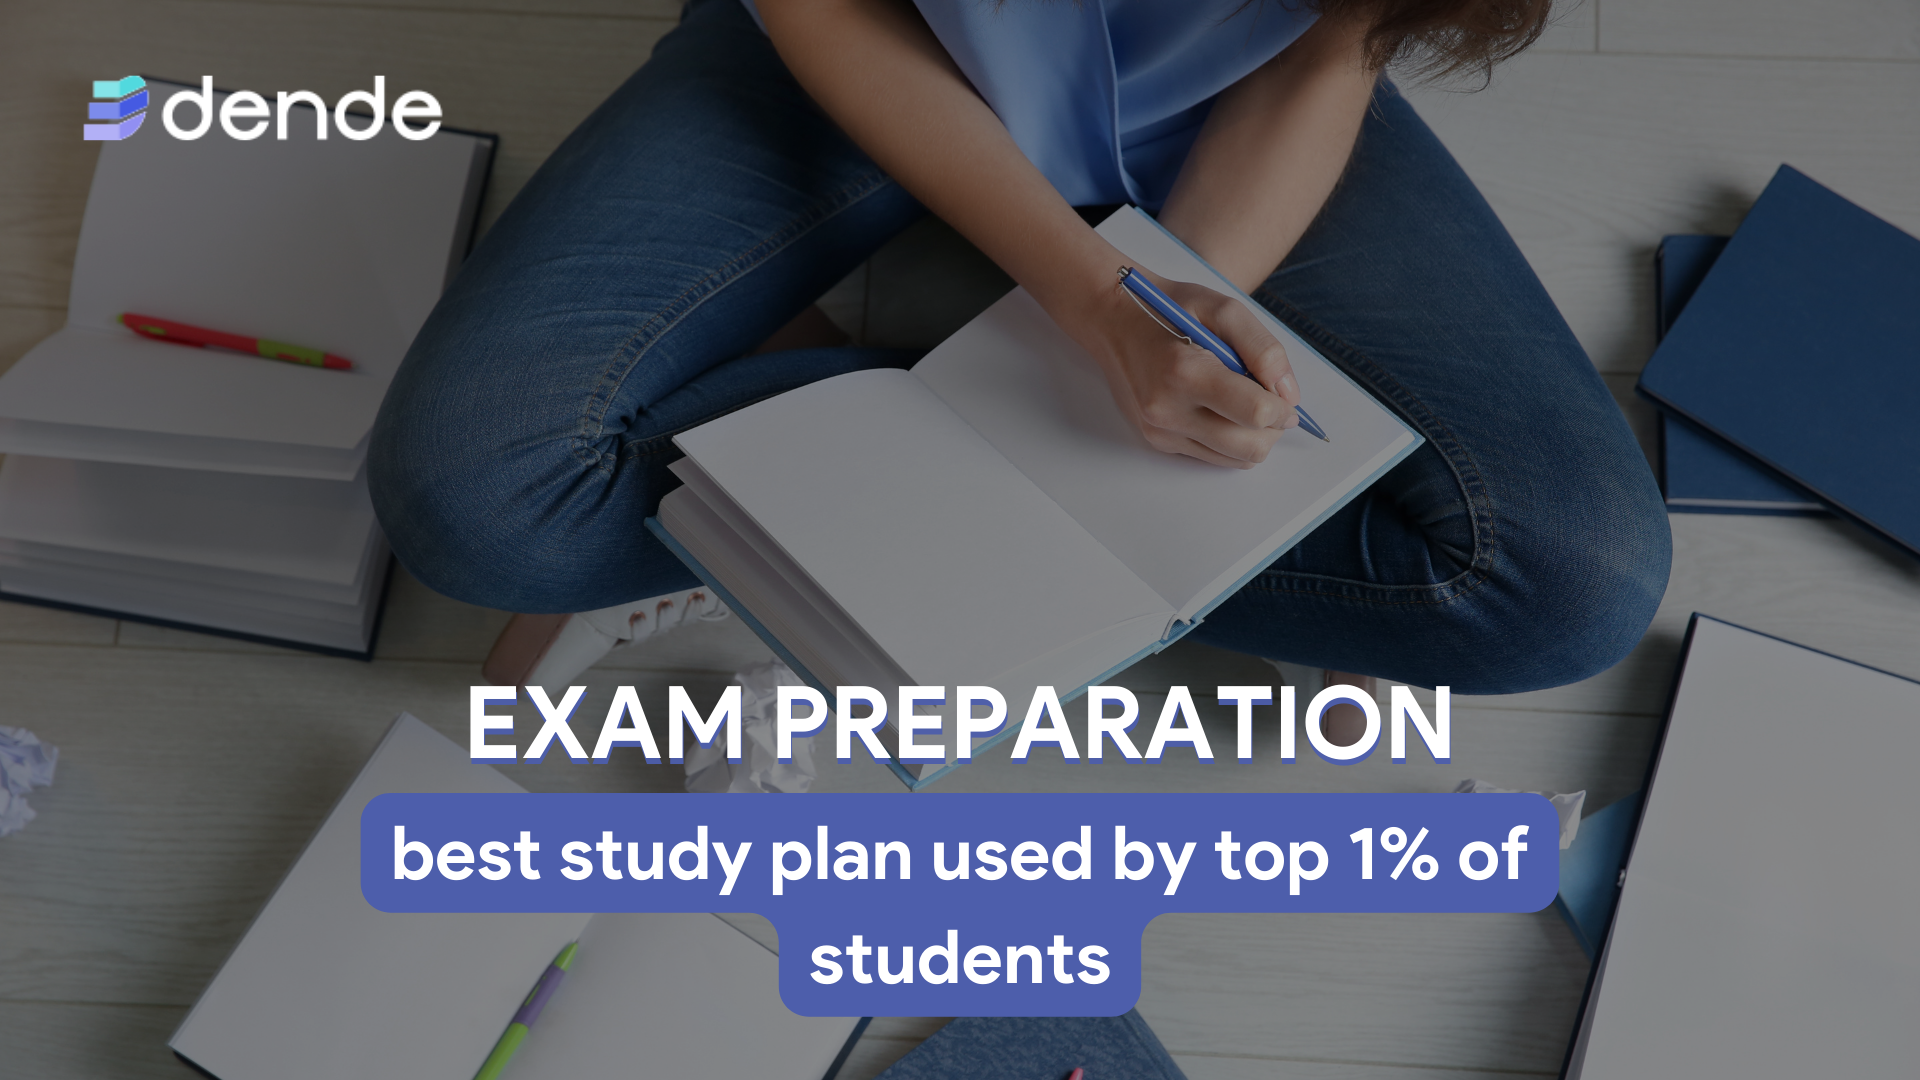 Exam preparation: best study plan used by top 1% of students